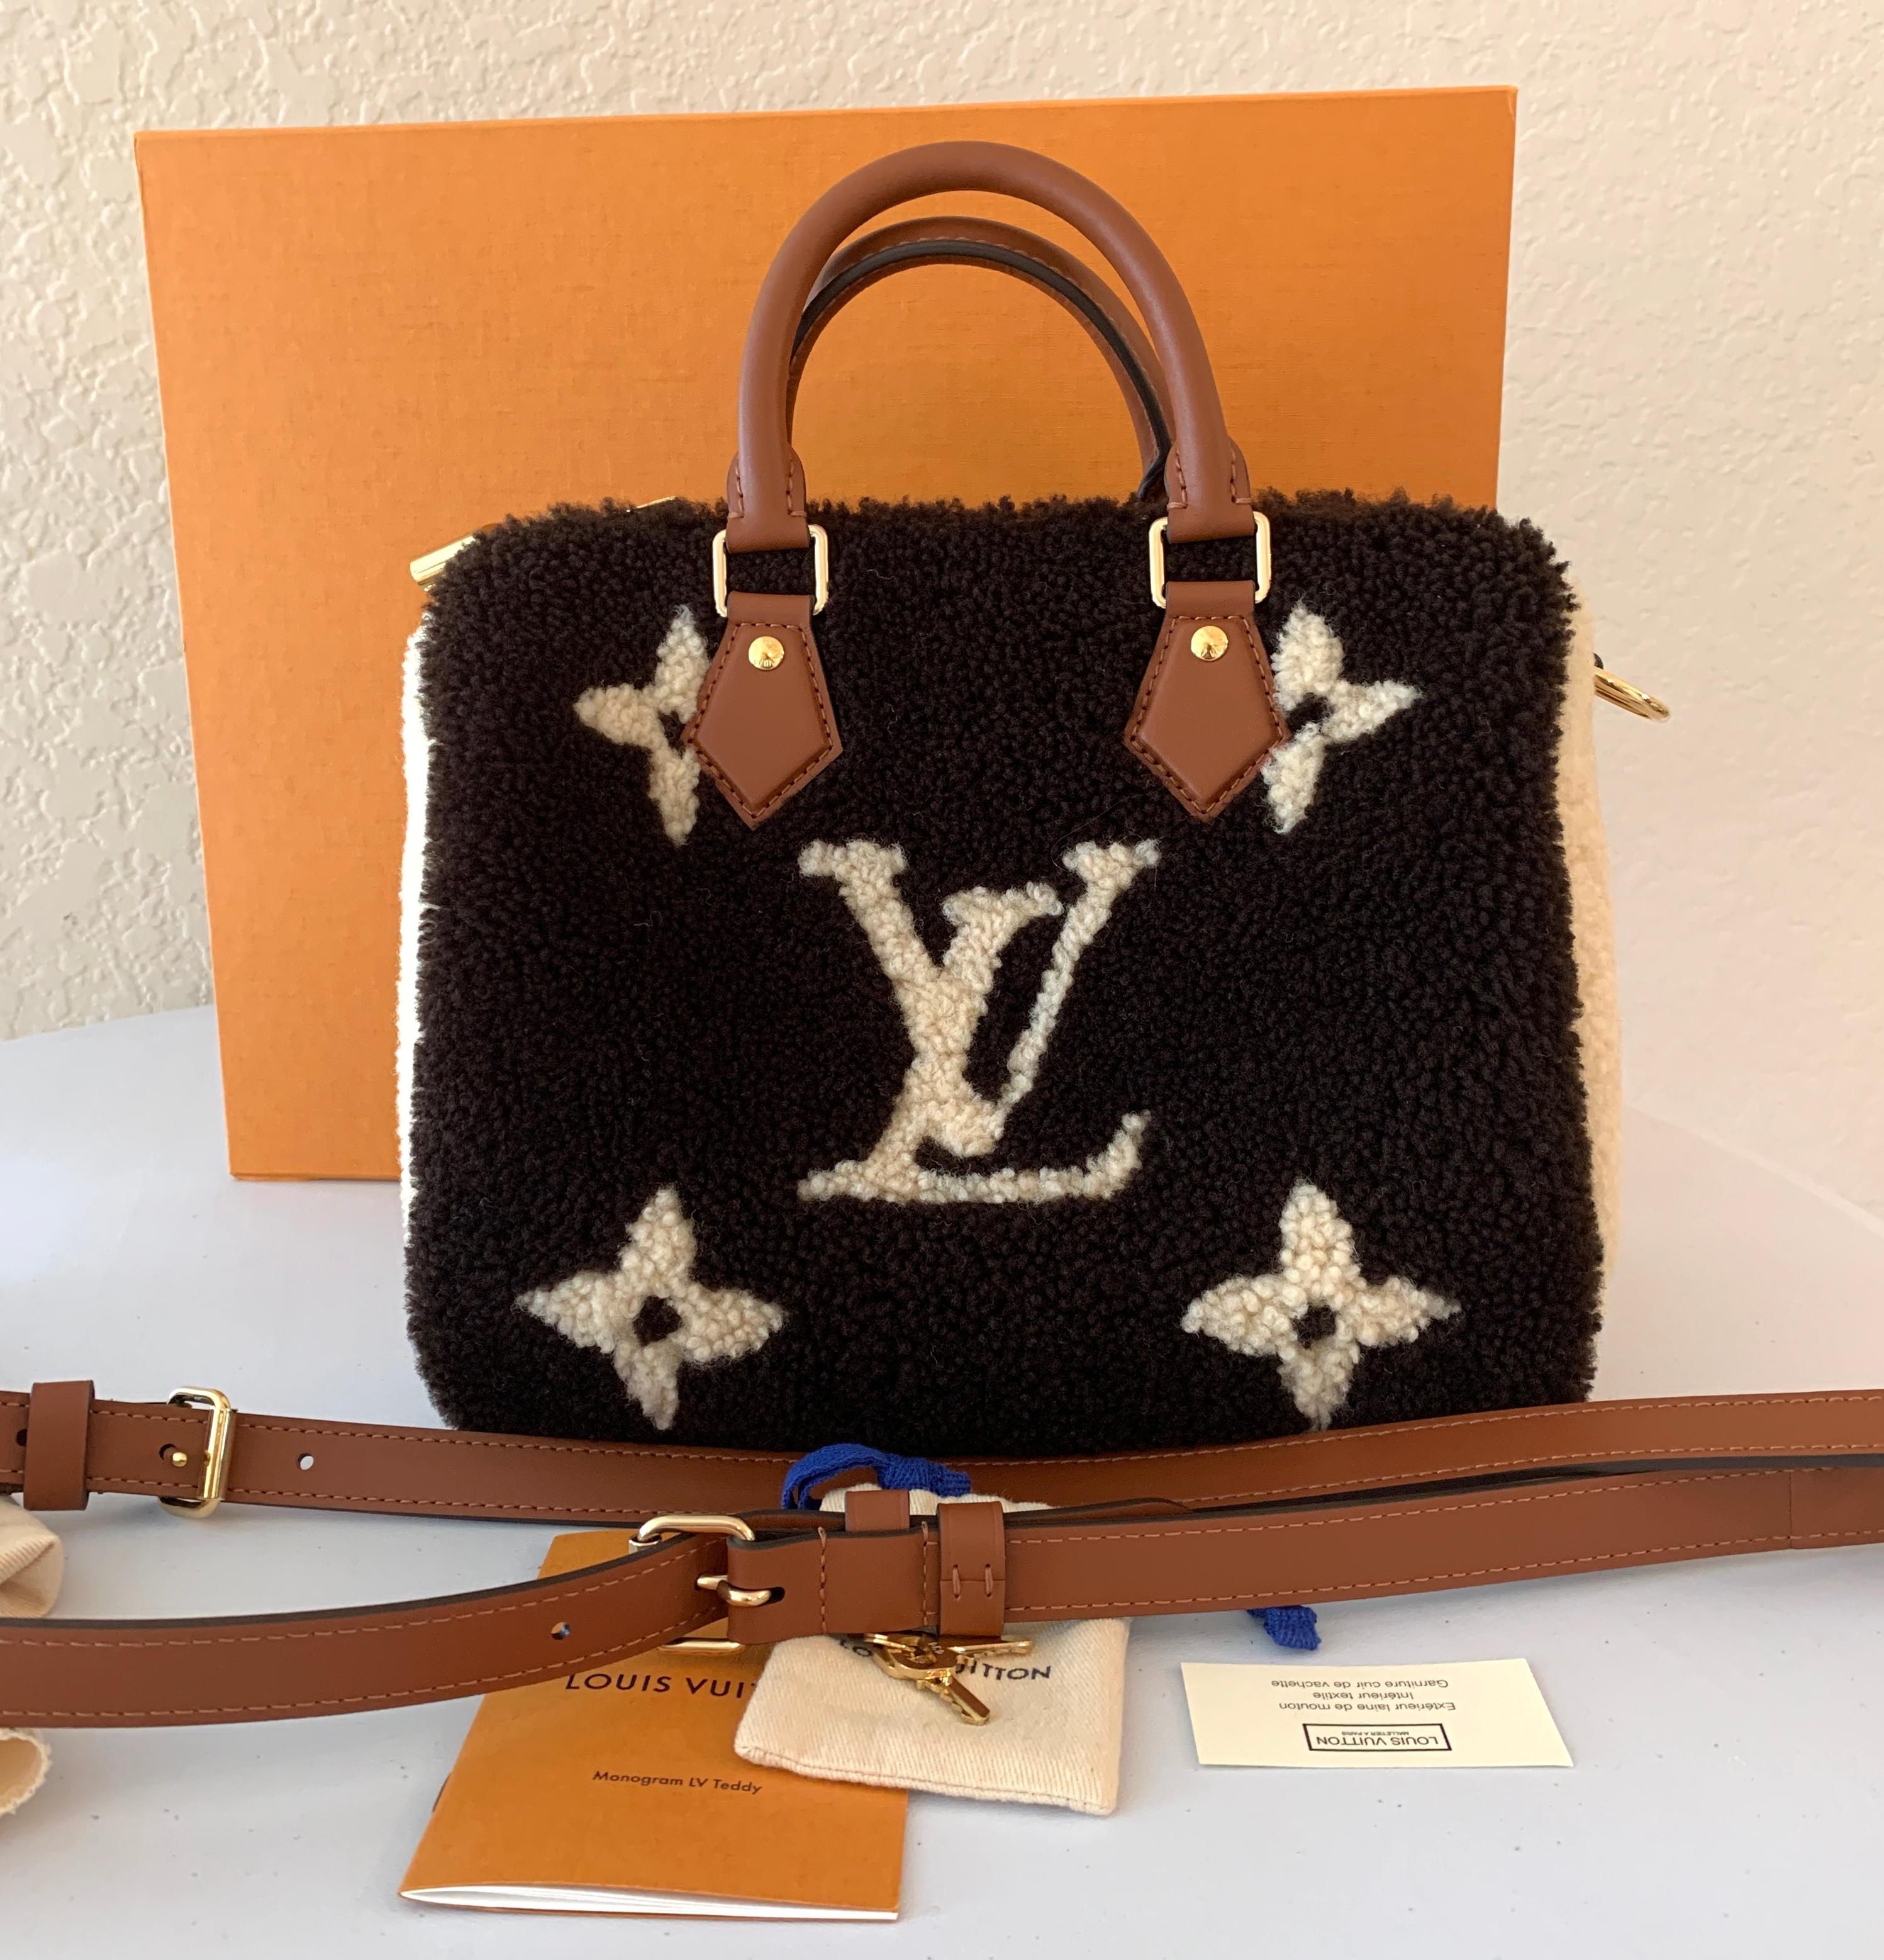 Louis Vuitton 
Speedy 
Shearling
Teddy
This soldout immediately
What a great bag!
 
GIANT MONOGRAM
Speedy - Monogram Giant - Teddy
 
Louis Vuitton invites you to experience its limited edition collection: Monogram Giant Teddy
 
Monogram Giant is